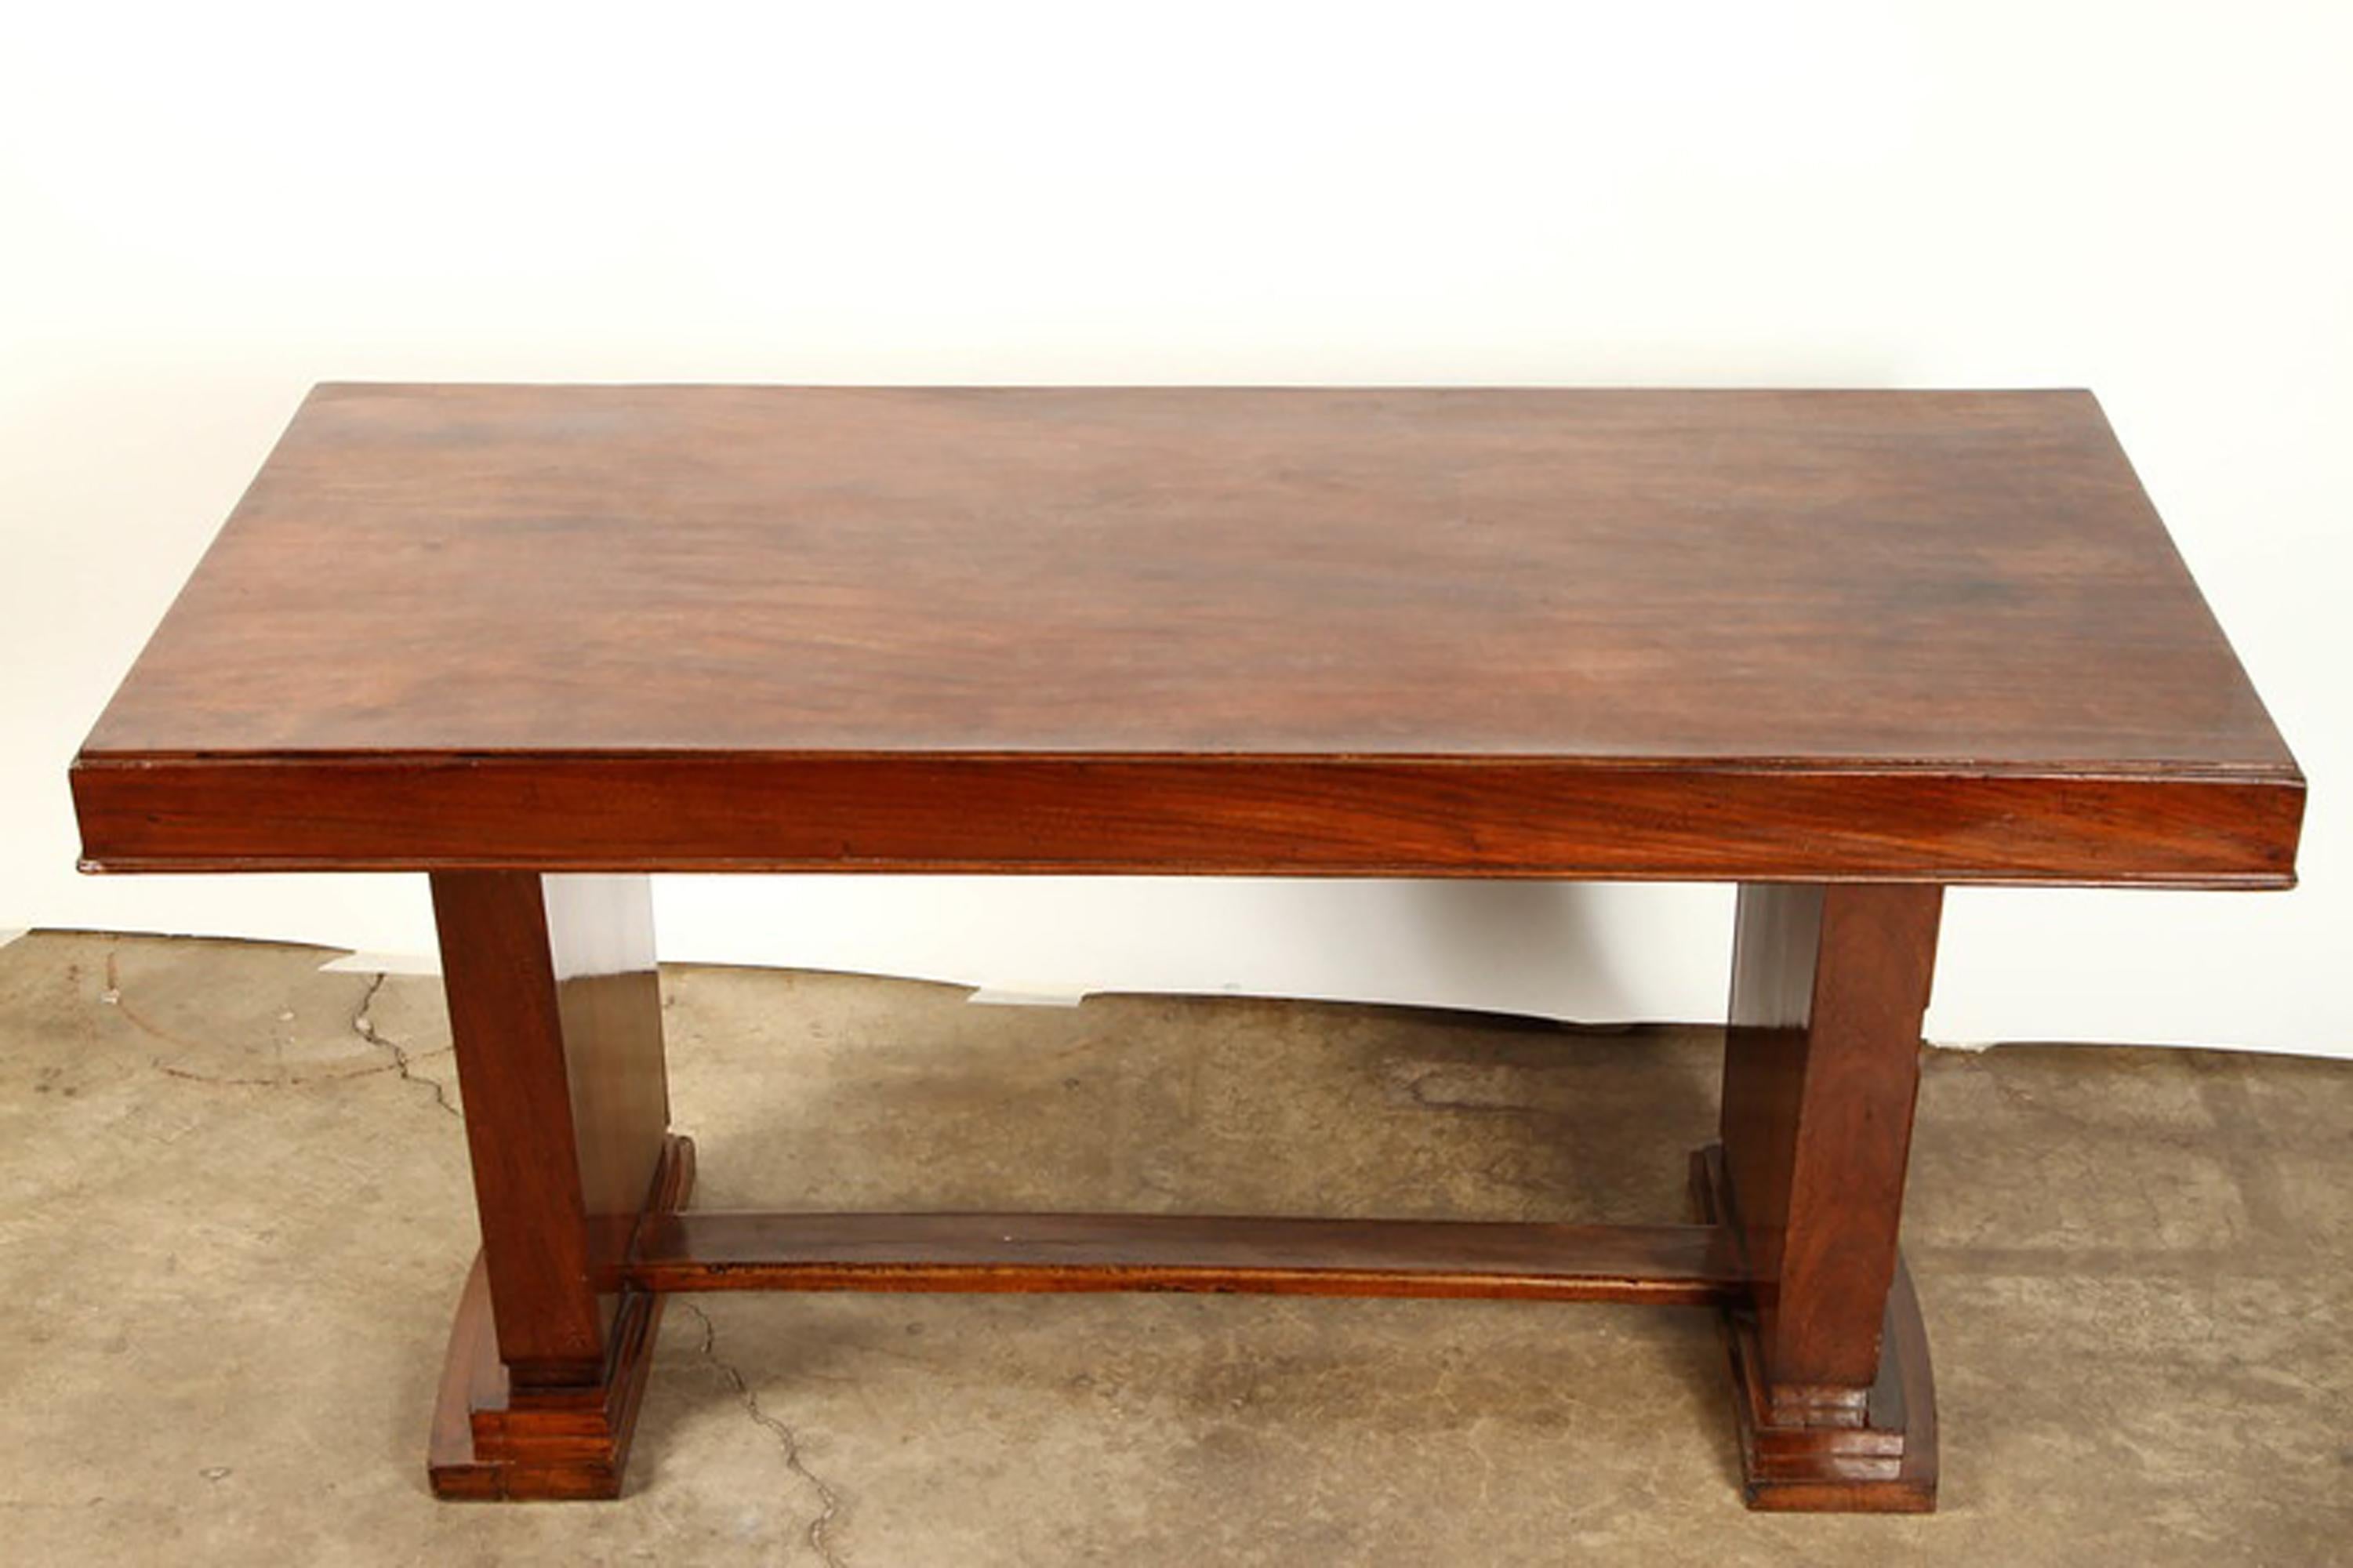 An Art Deco rosewood French Colonial desk, created circa 1930 for the expatriate market in Indo China. In richly colored and grained rosewood, with elegant lines. Simple moldings outline the edges of the top and the square panels of the slightly